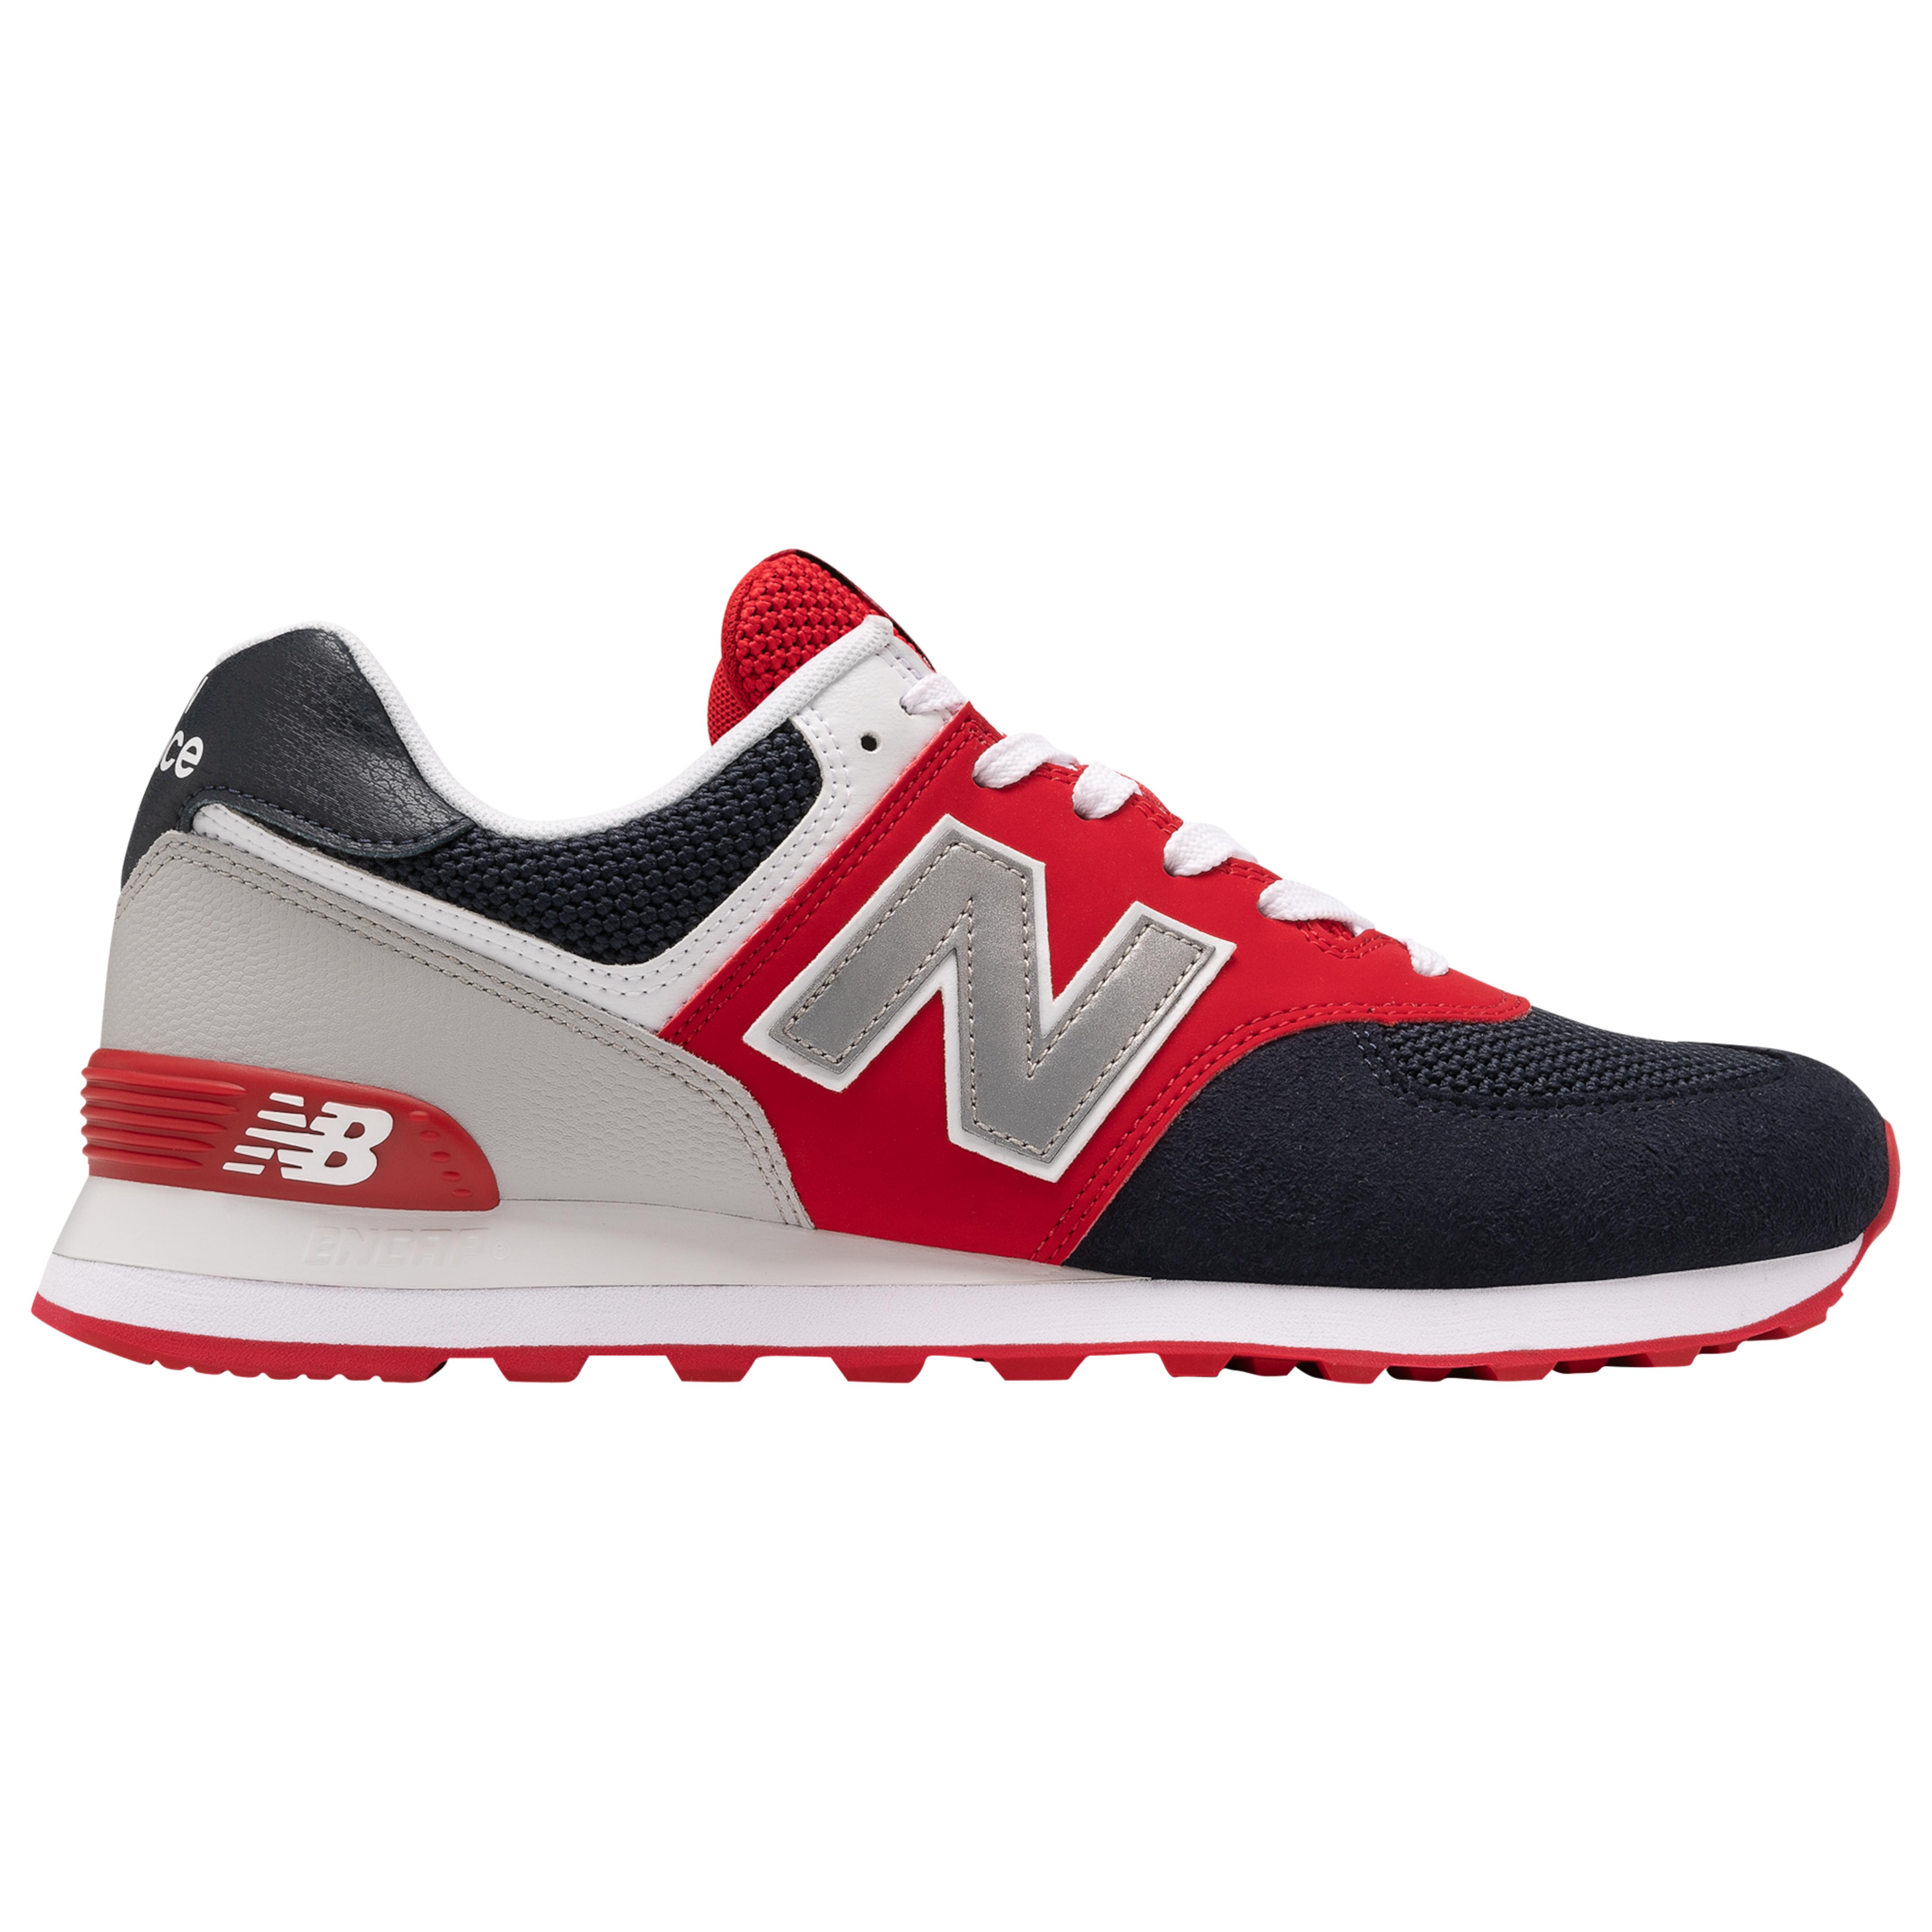 New Balance Leather 574 in Red for Men - Lyst